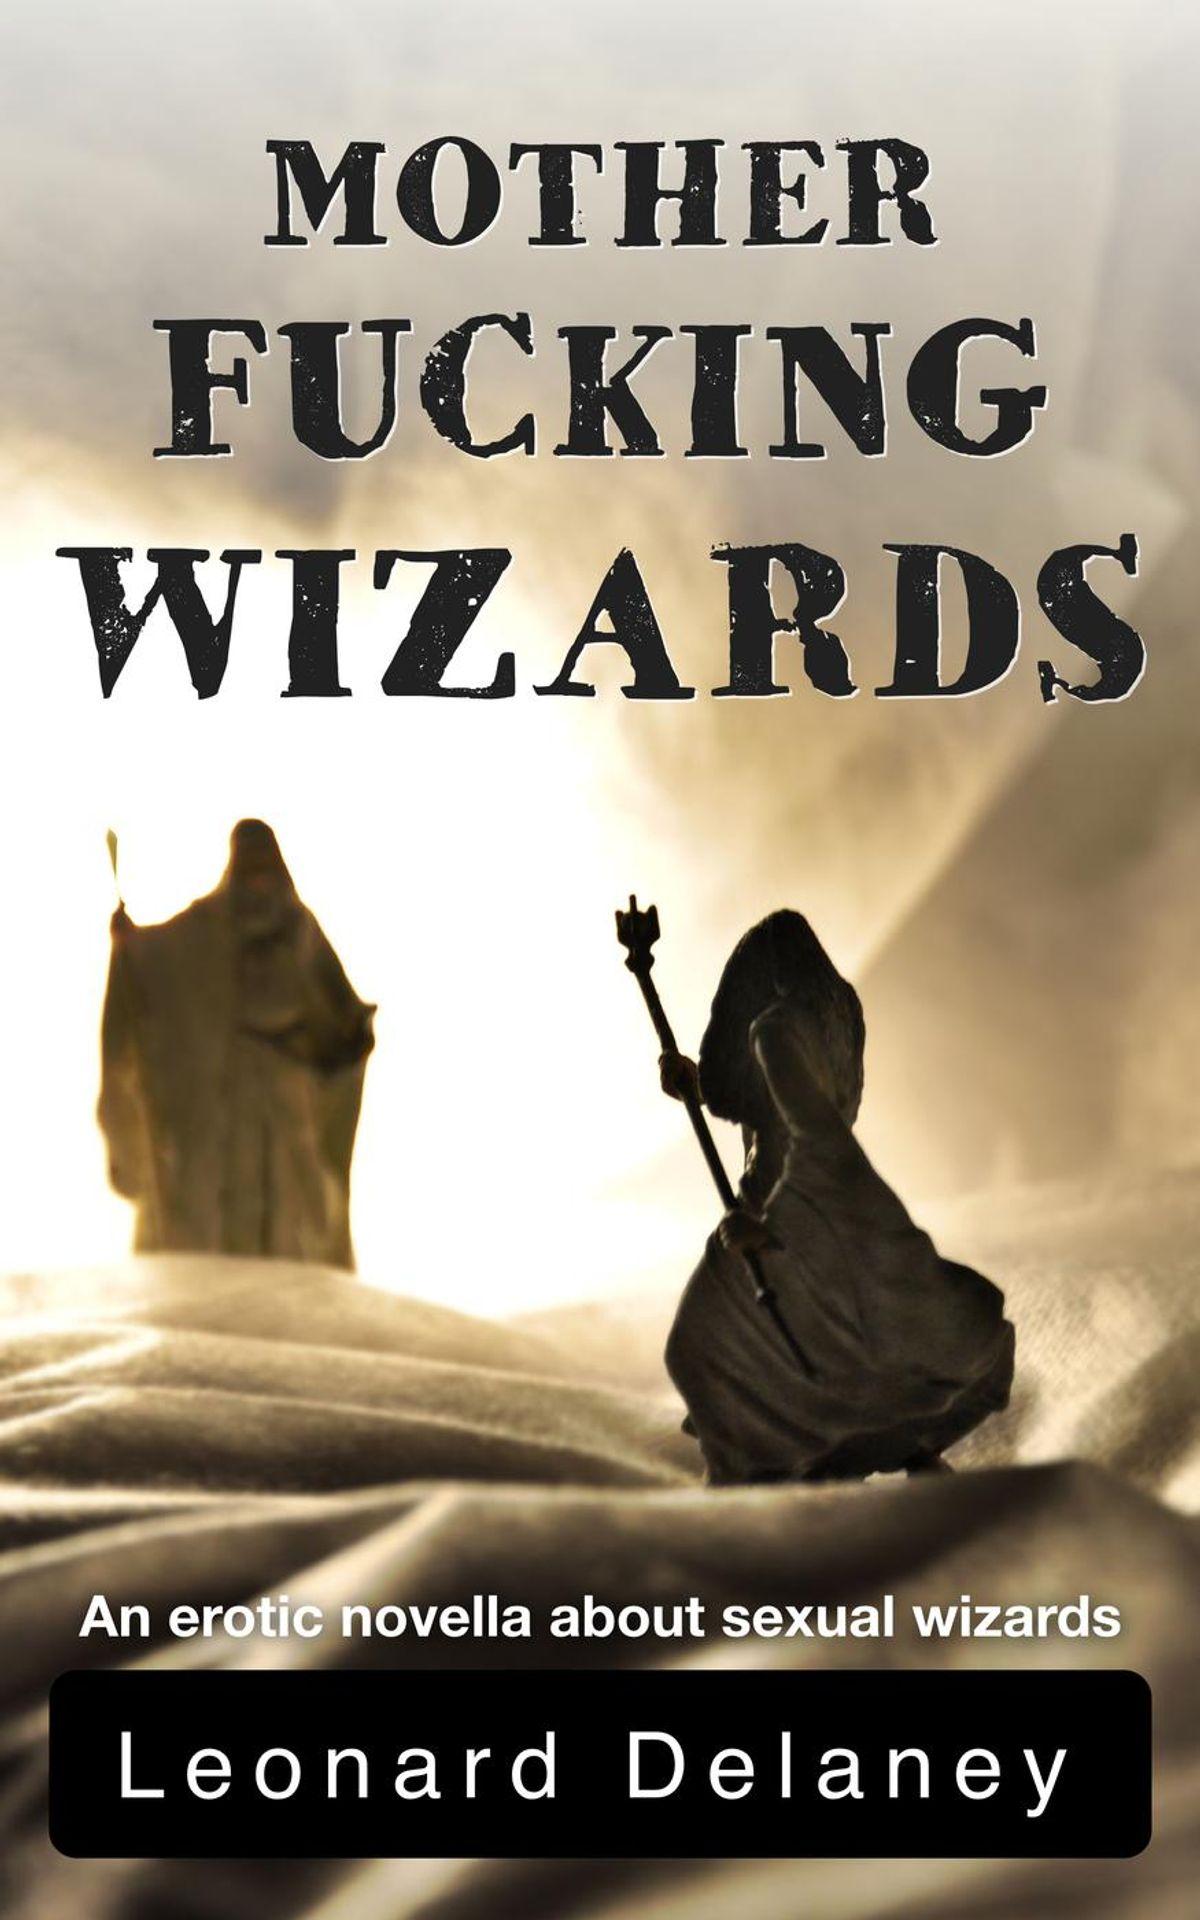 Not the wizard once more